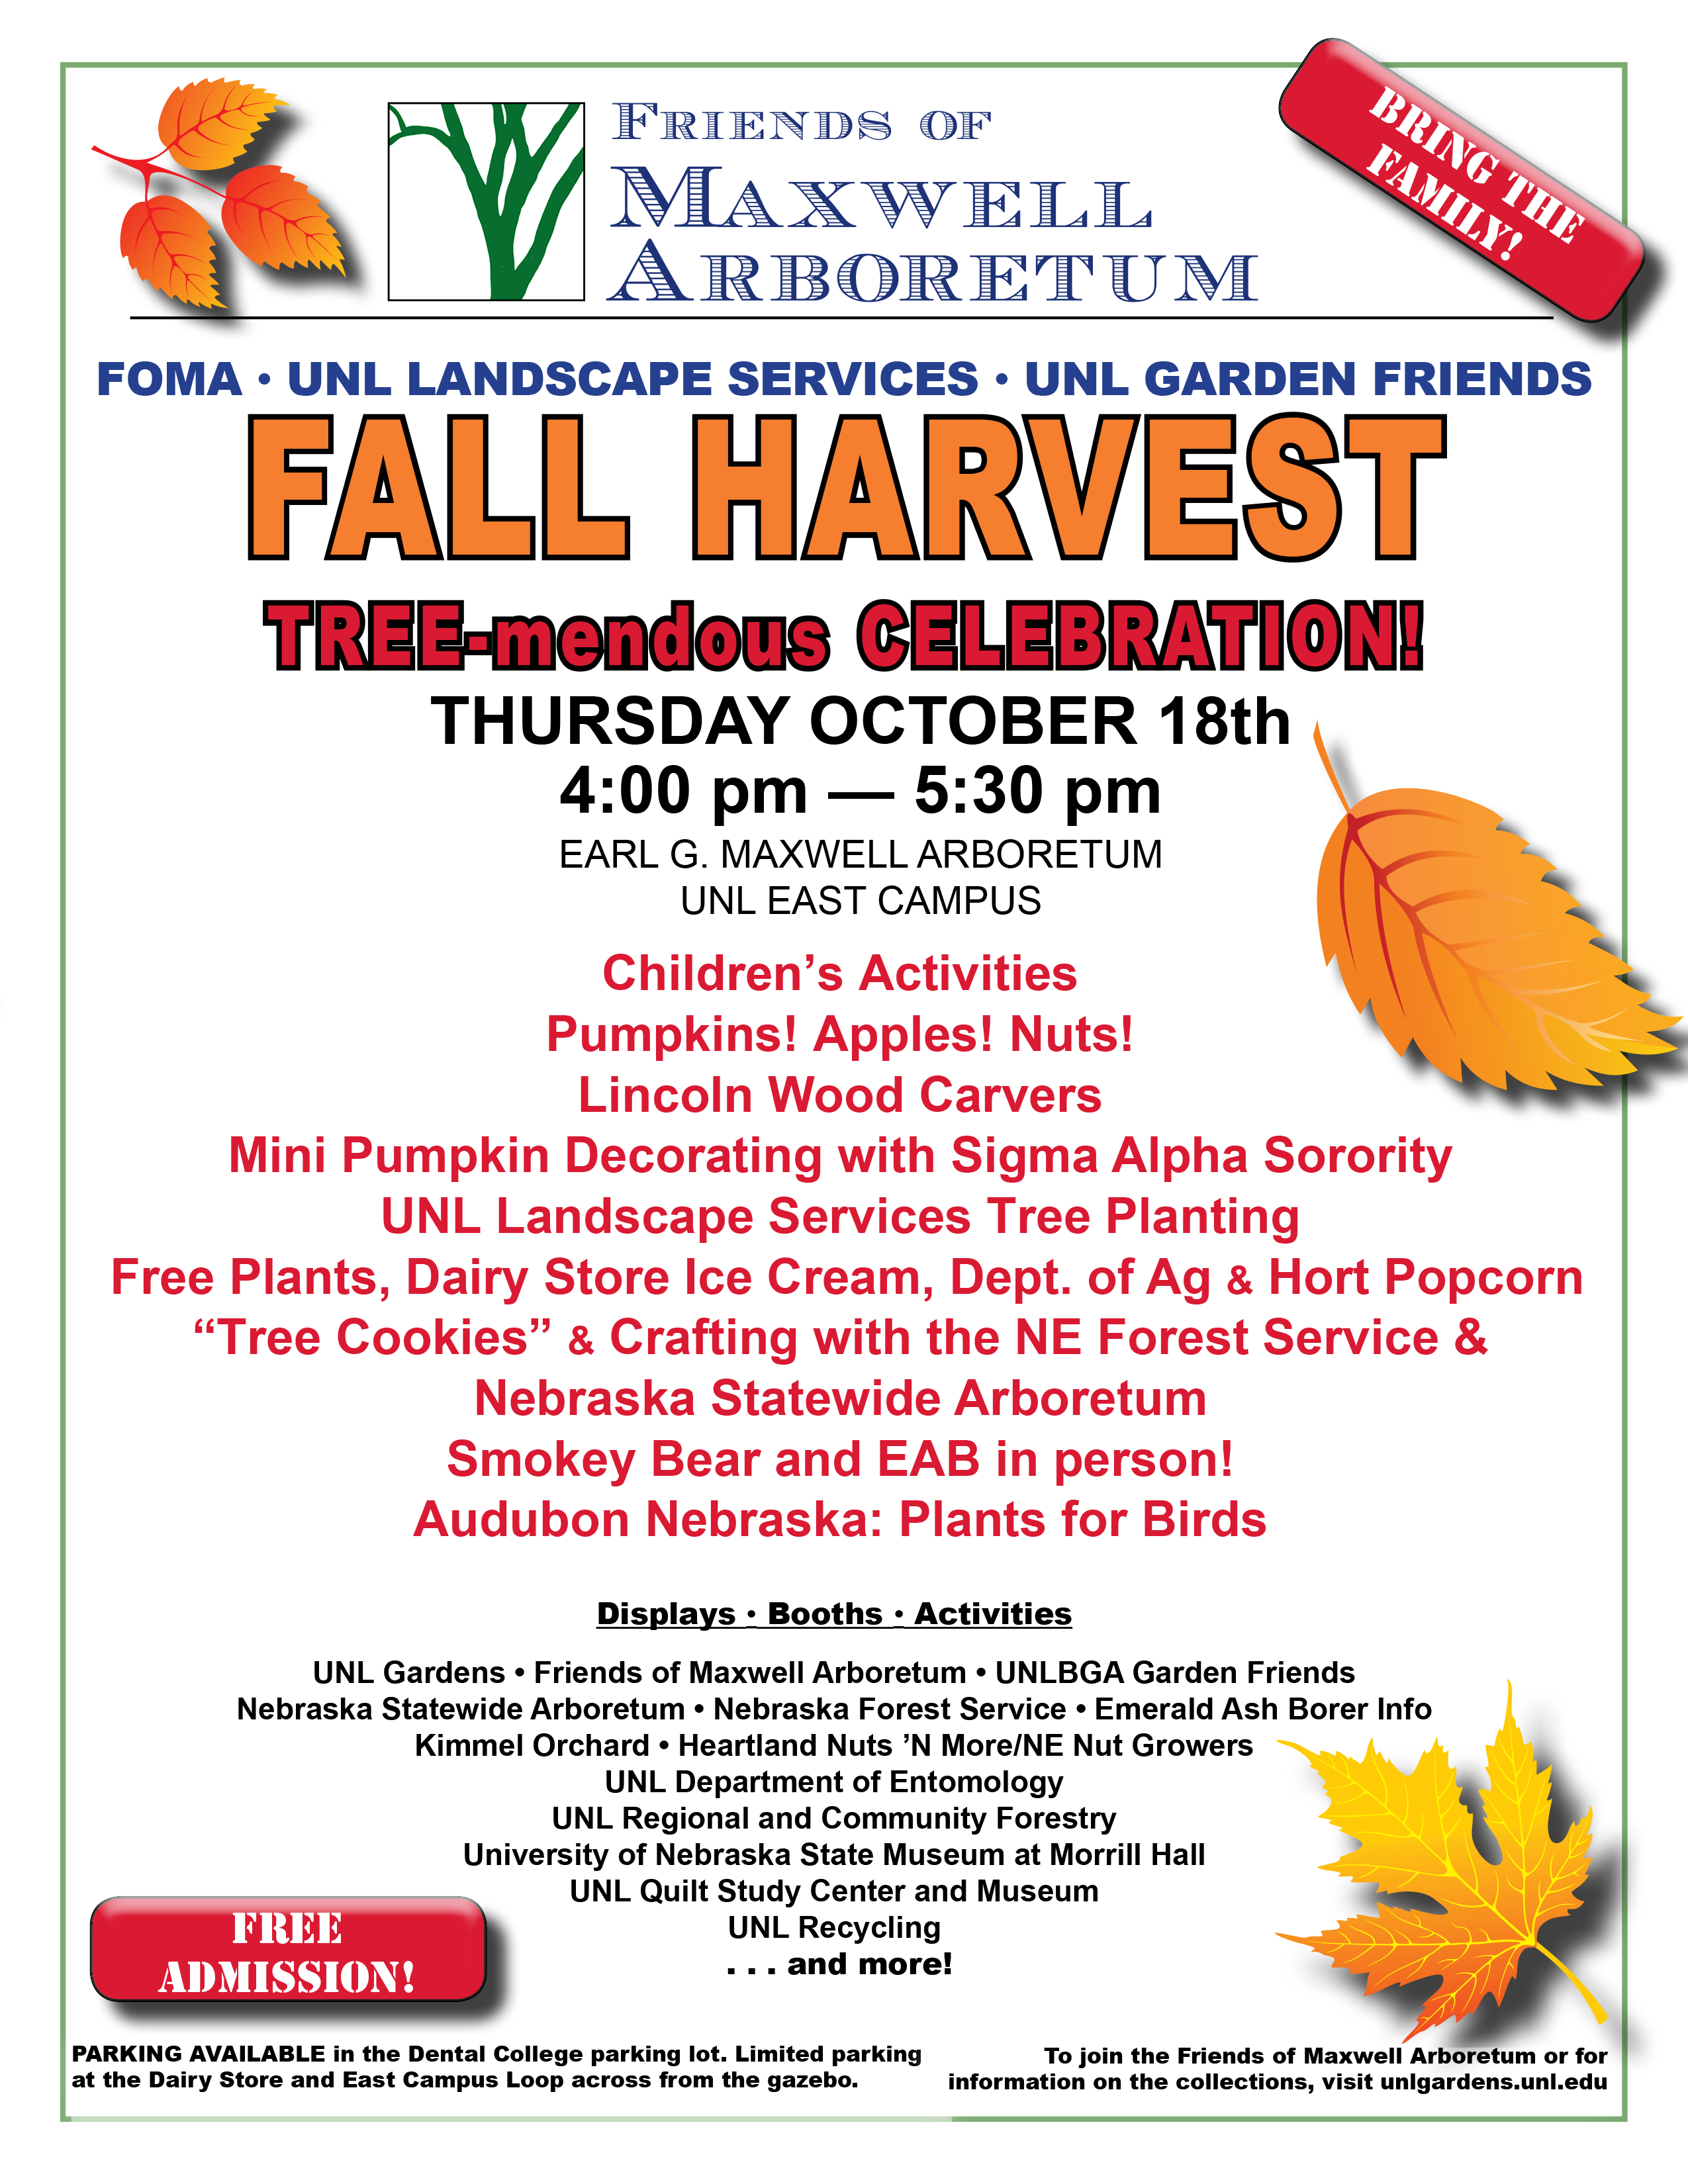 The public is invited to the Friends of Maxwell Arboretum's fall festival on Oct. 18.